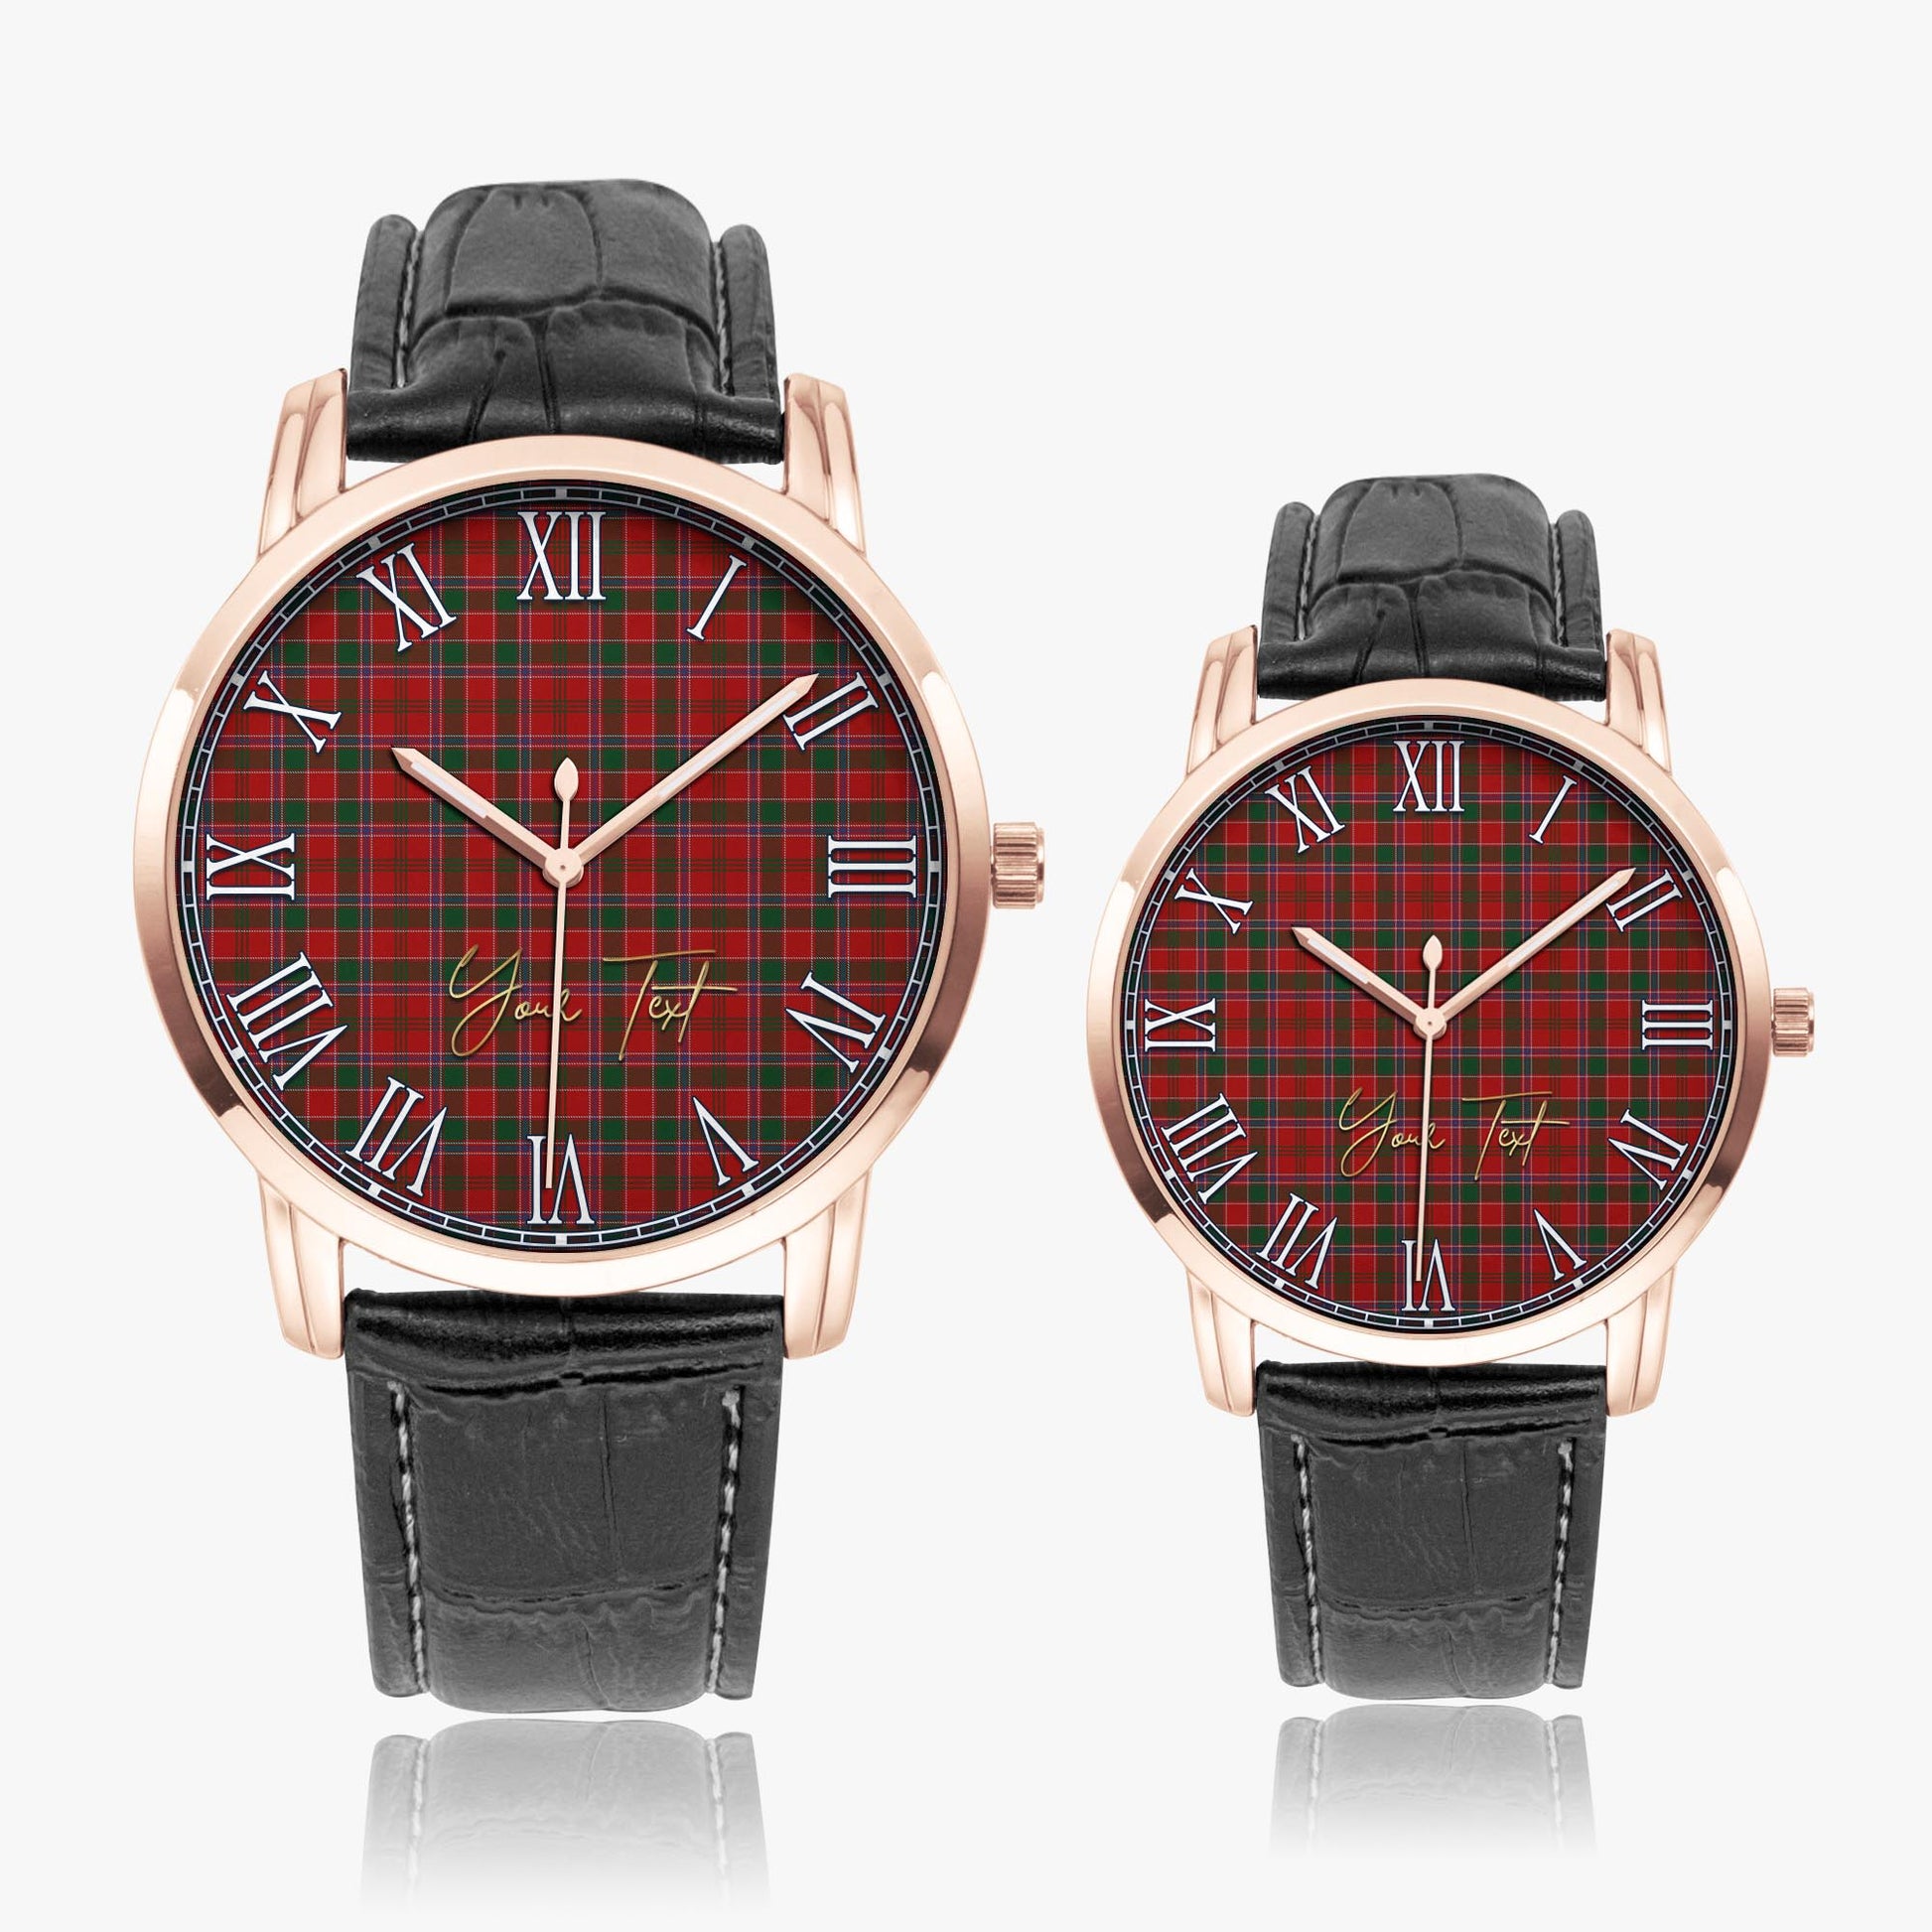 Dalzell (Dalziel) Tartan Personalized Your Text Leather Trap Quartz Watch Wide Type Rose Gold Case With Black Leather Strap - Tartanvibesclothing